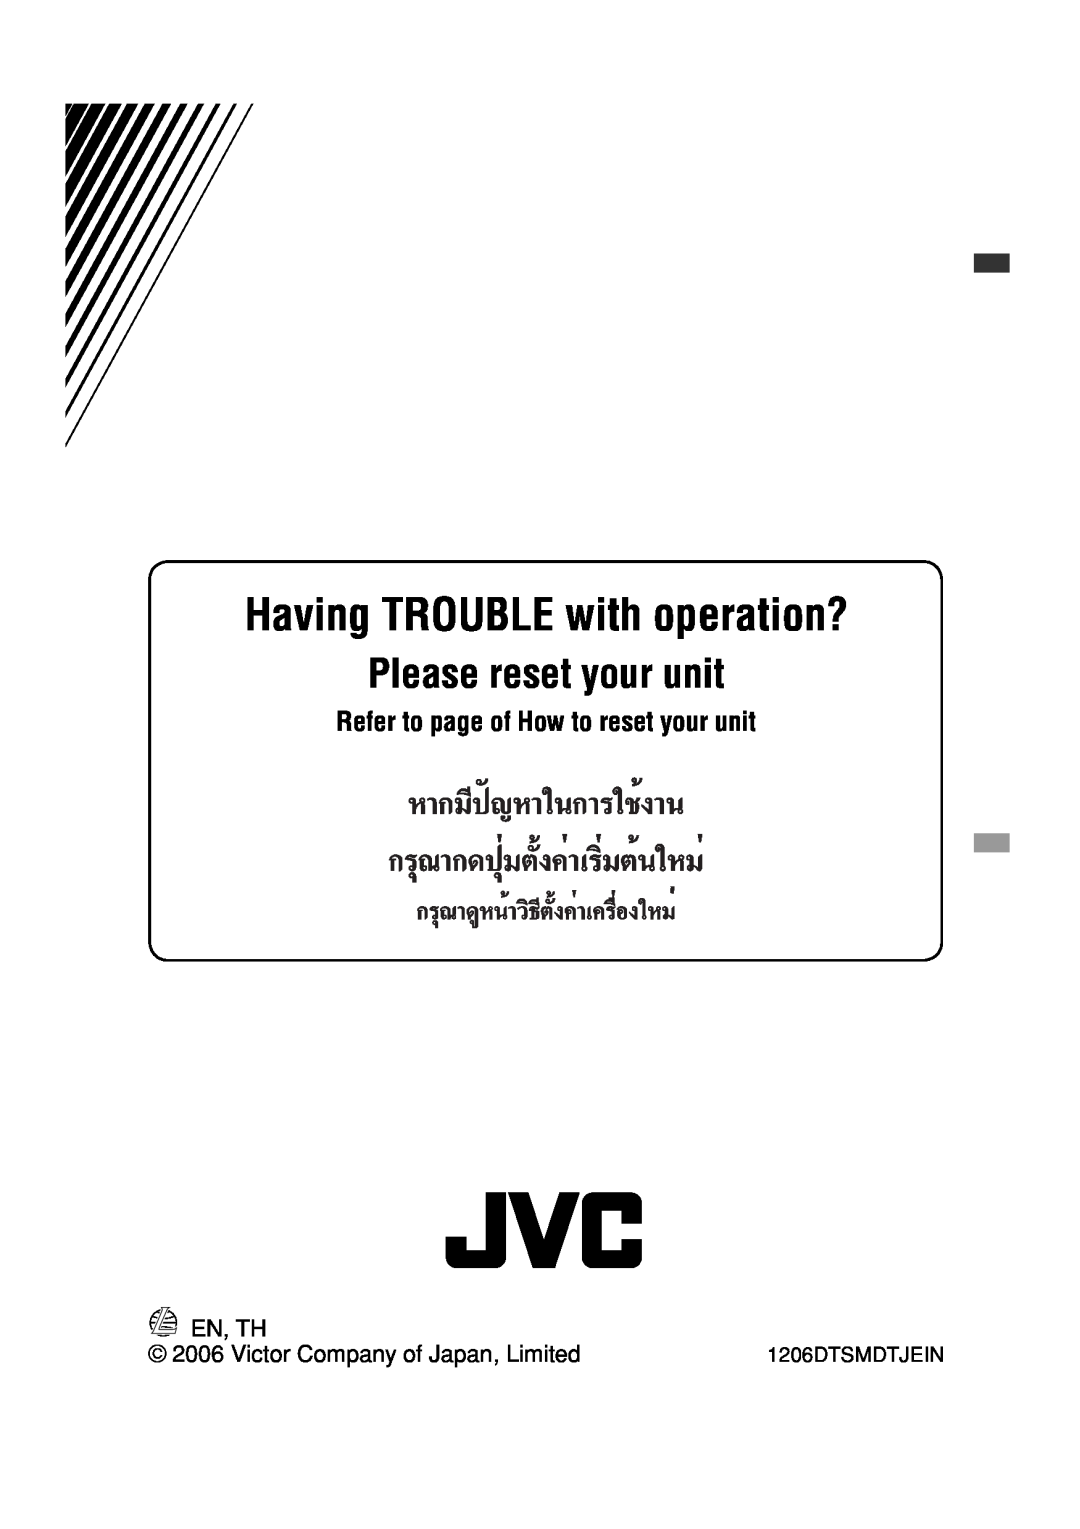 JVC GET0425-001A Having TROUBLE with operation?, Please reset your unit, Refer to page of How to reset your unit, En, Th 